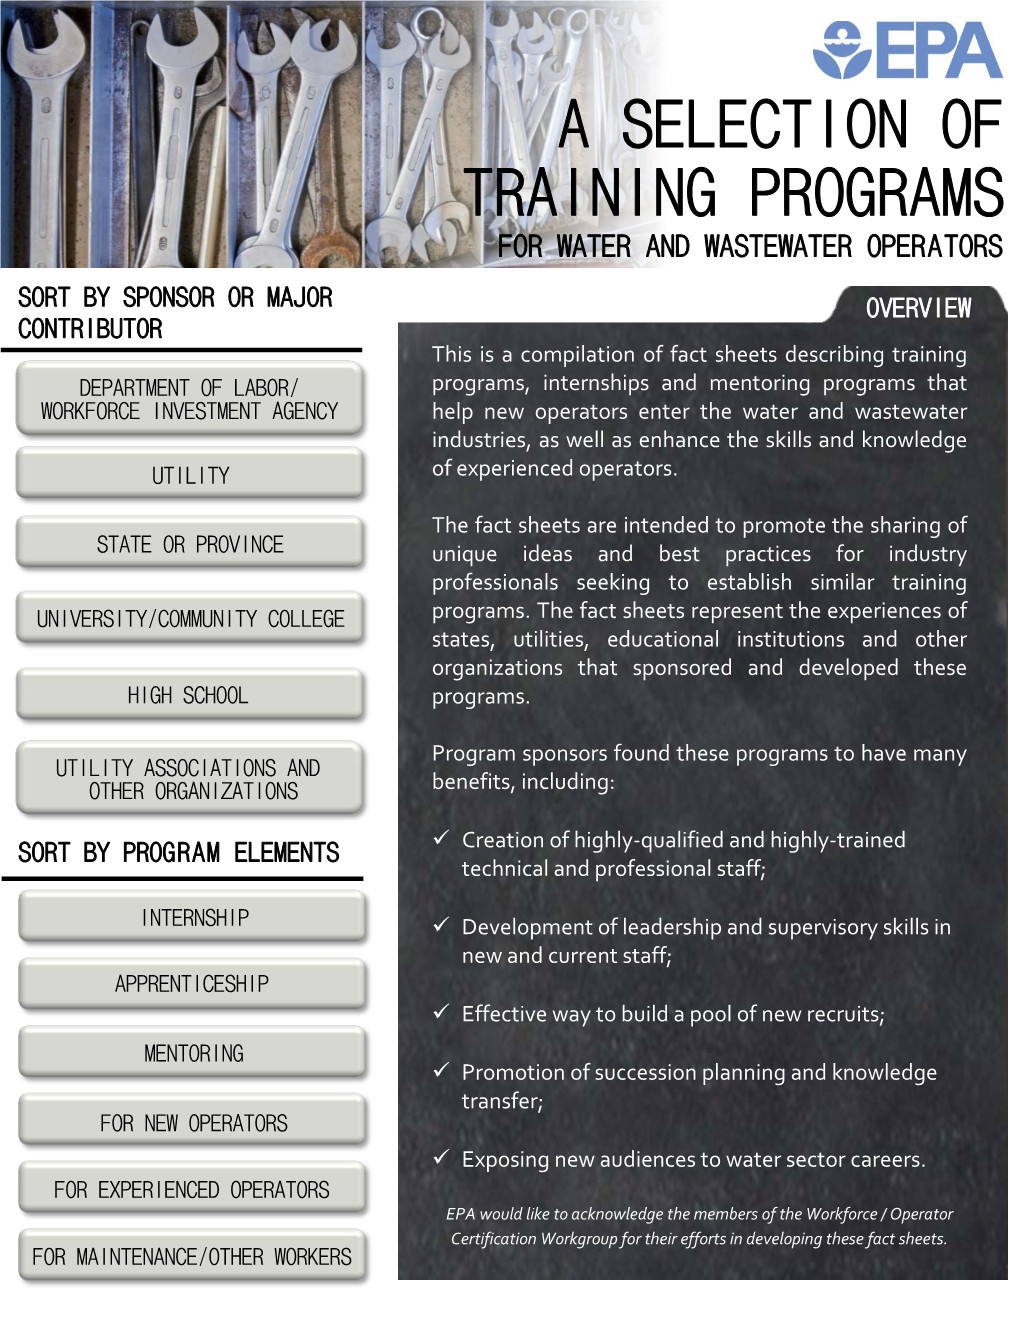 A Selection of Training Programs for Water and Wastewater Operators